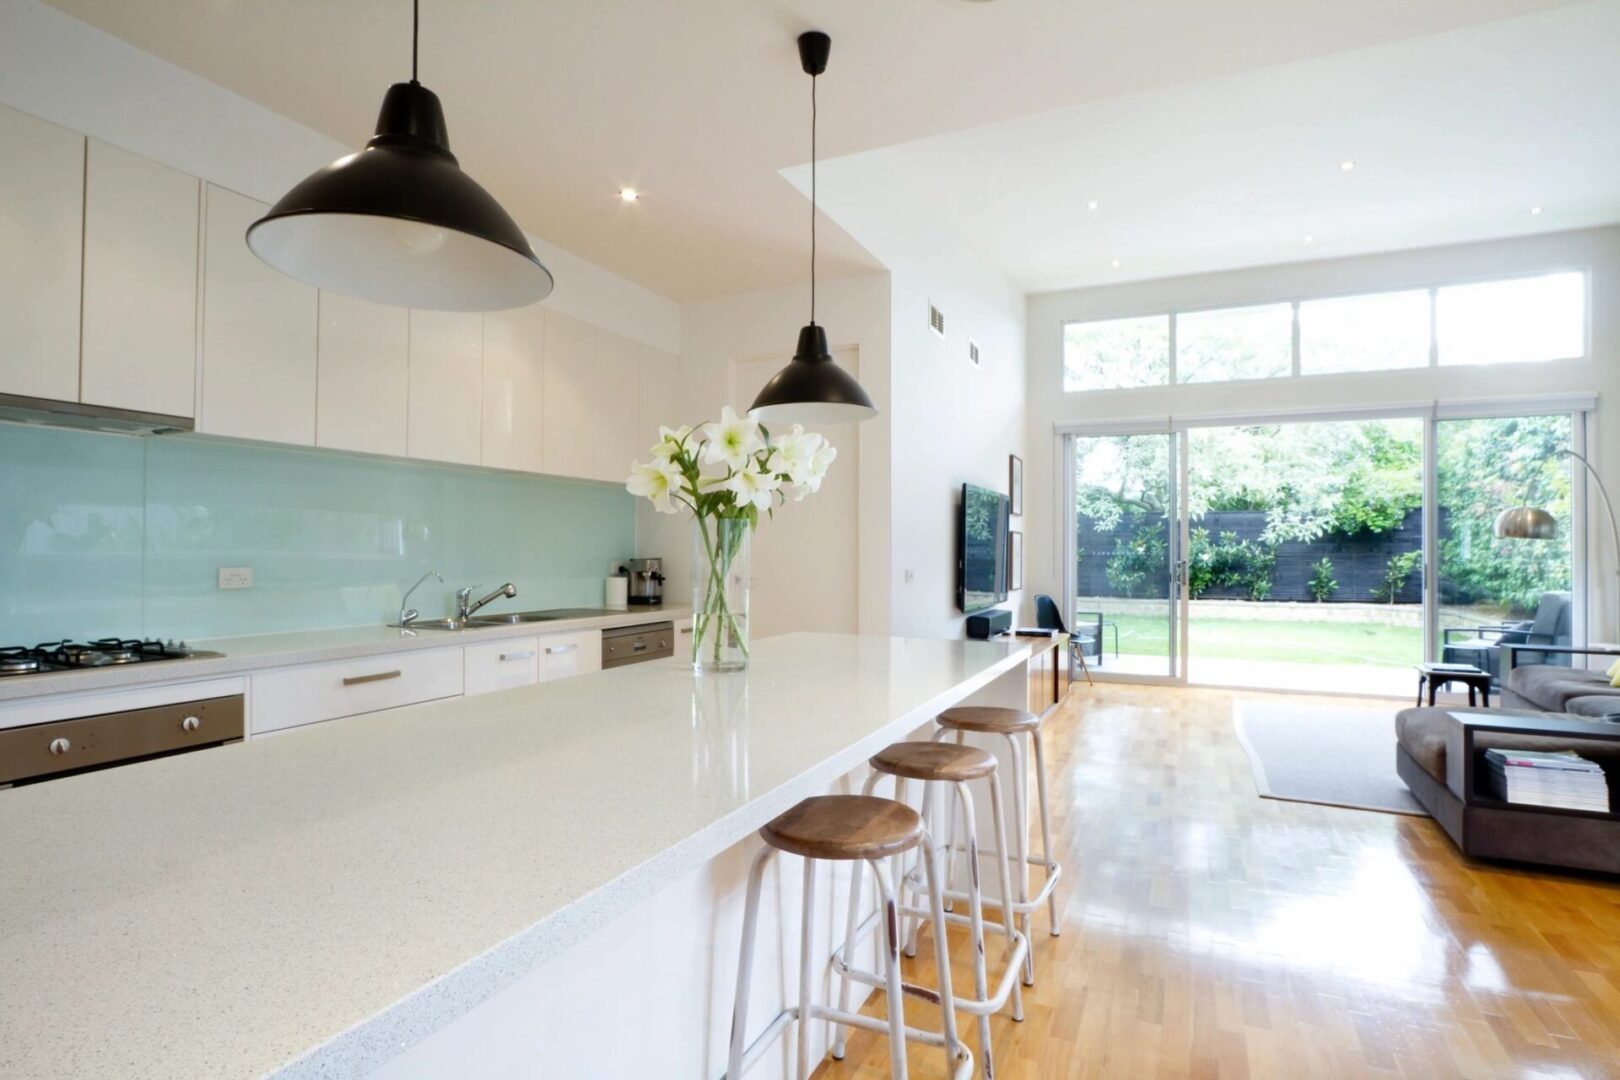 About London Kitchen and Bath - Modern kitchen with a large island and bar stools.